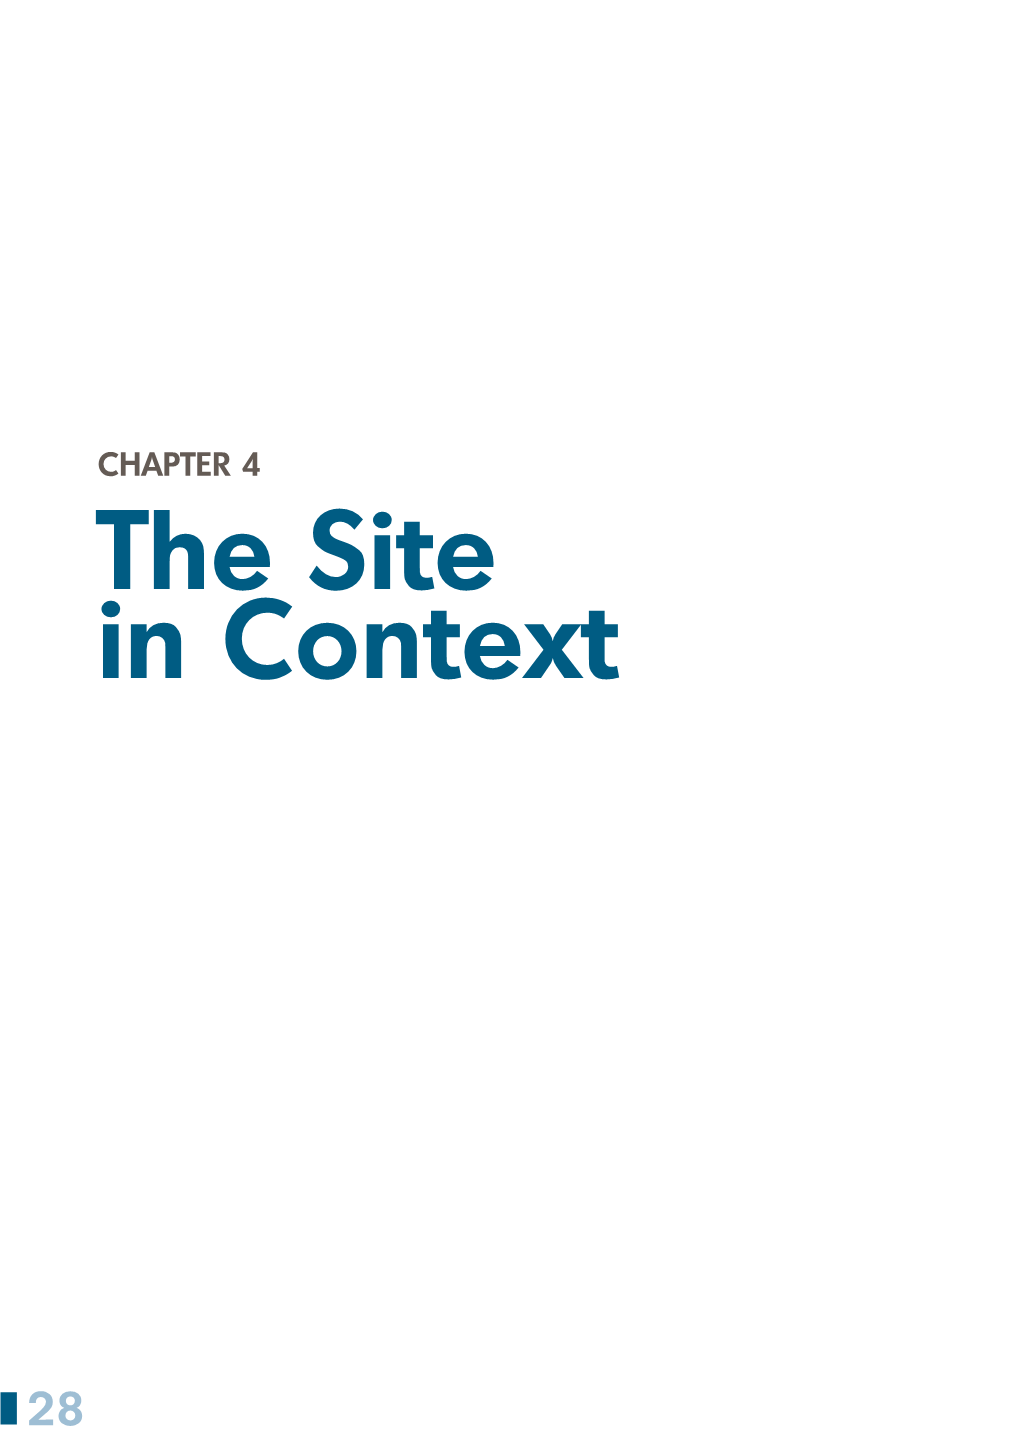 The Site in Context